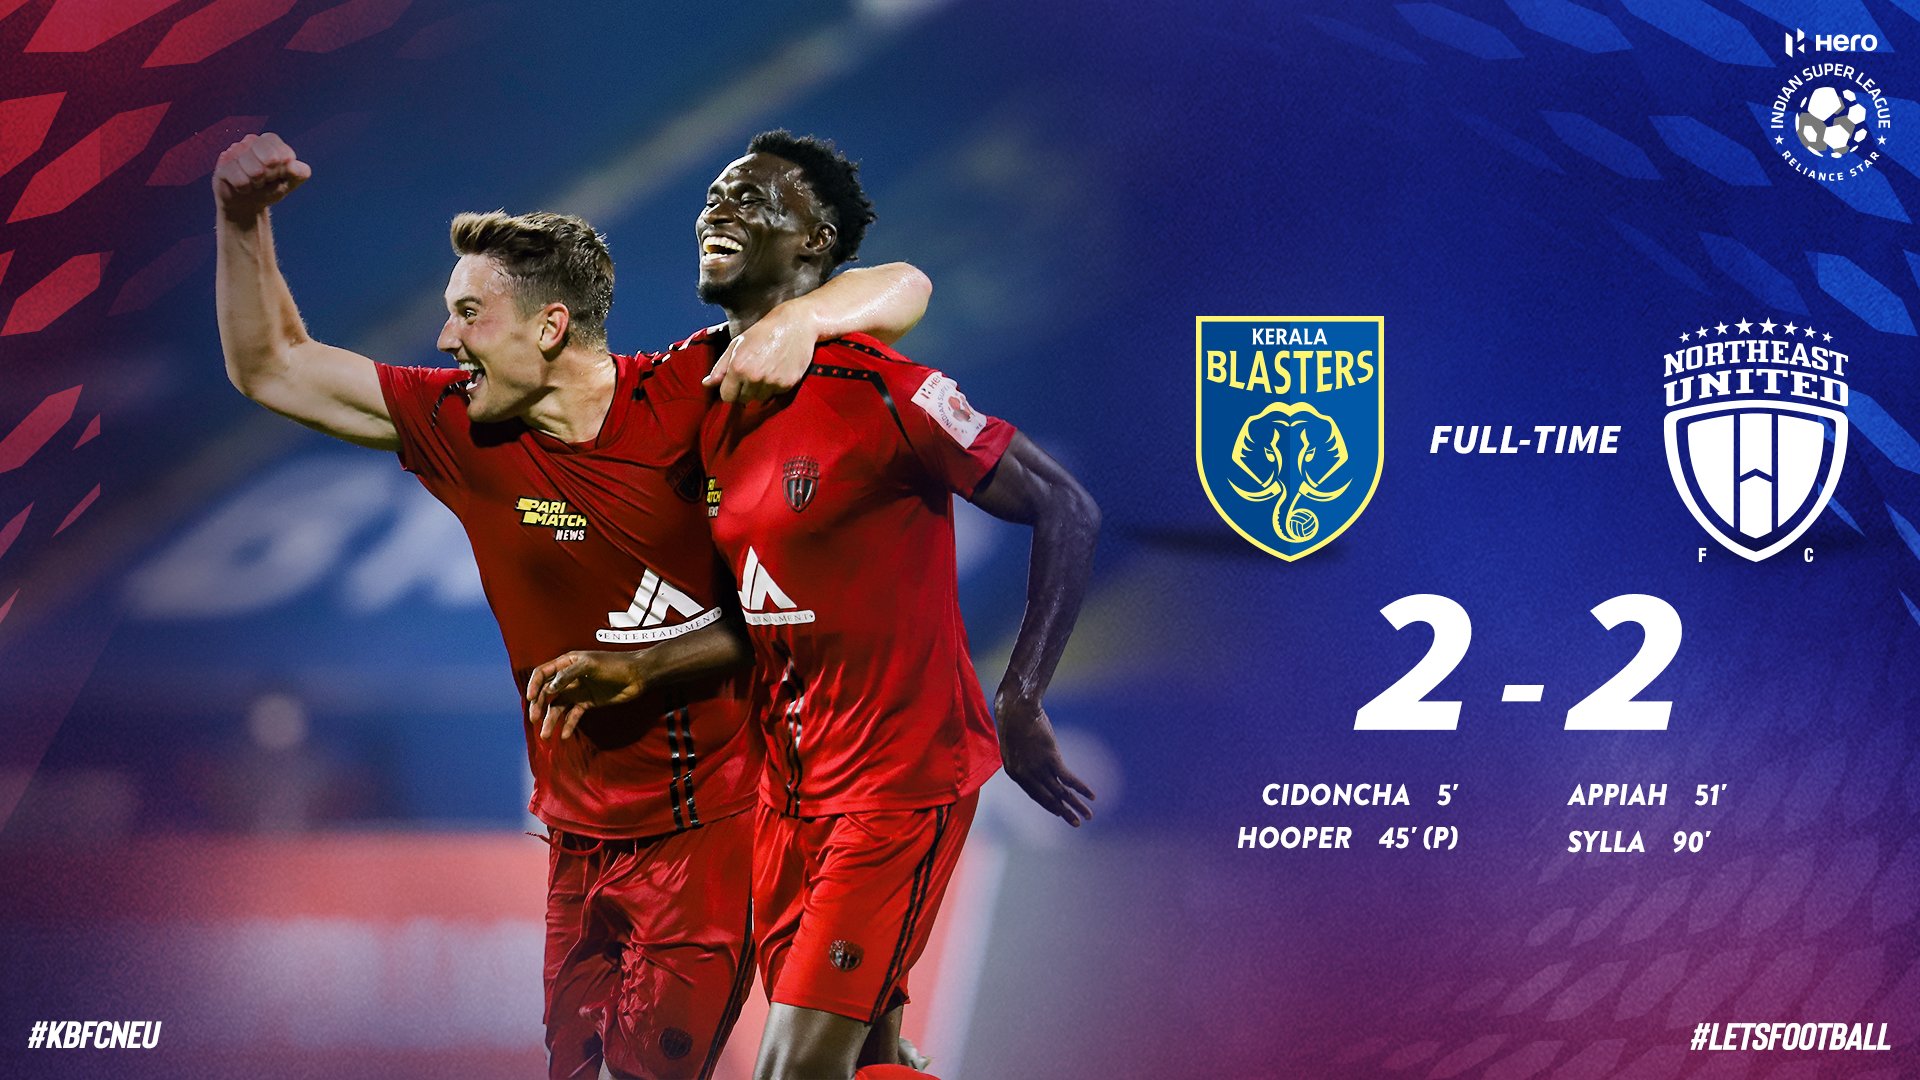 Kerala+Blasters+and+Northeast+United+shared+points+in+an+entertaining+match